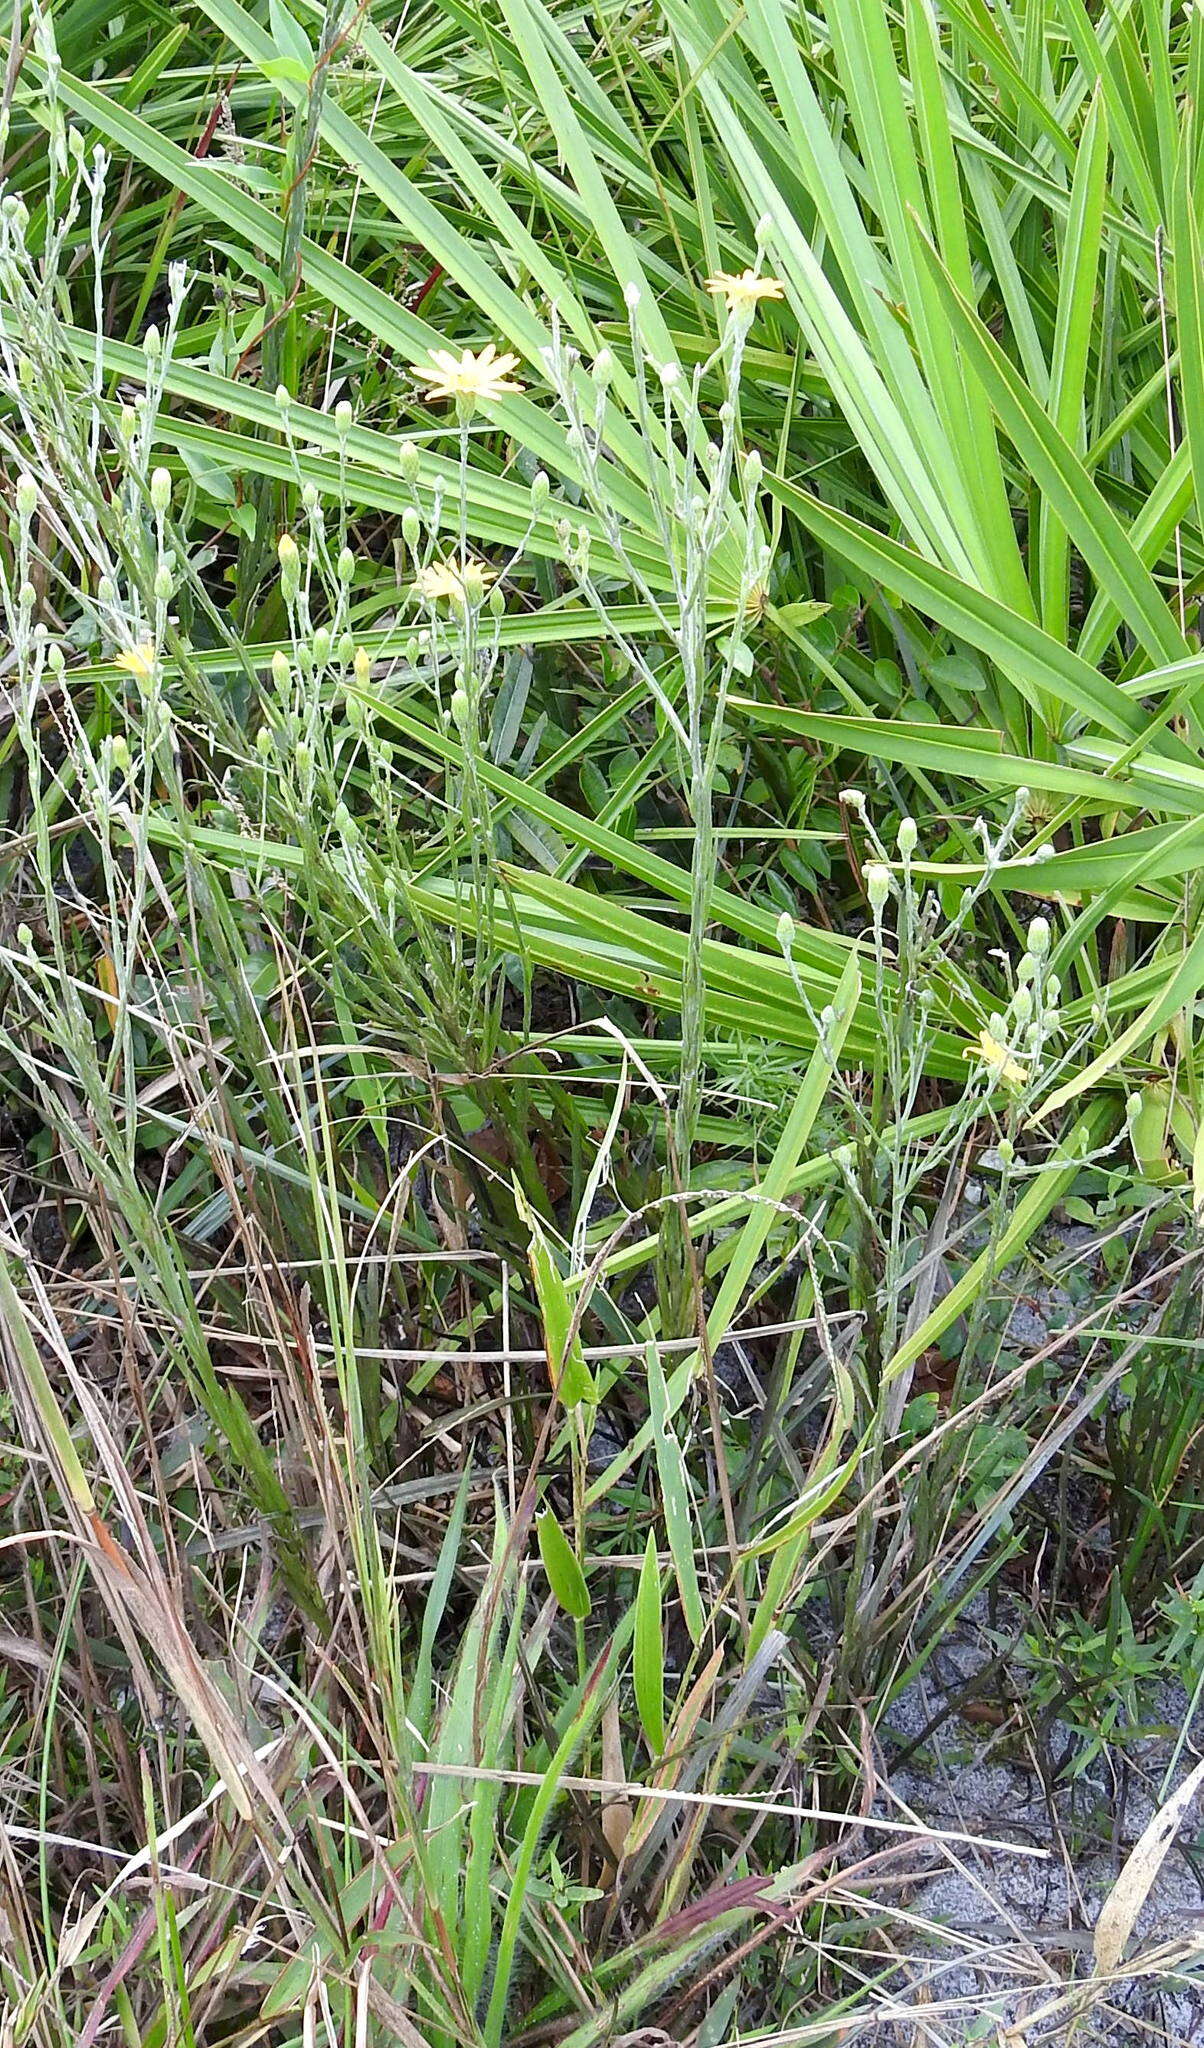 Image of Tracy's silkgrass